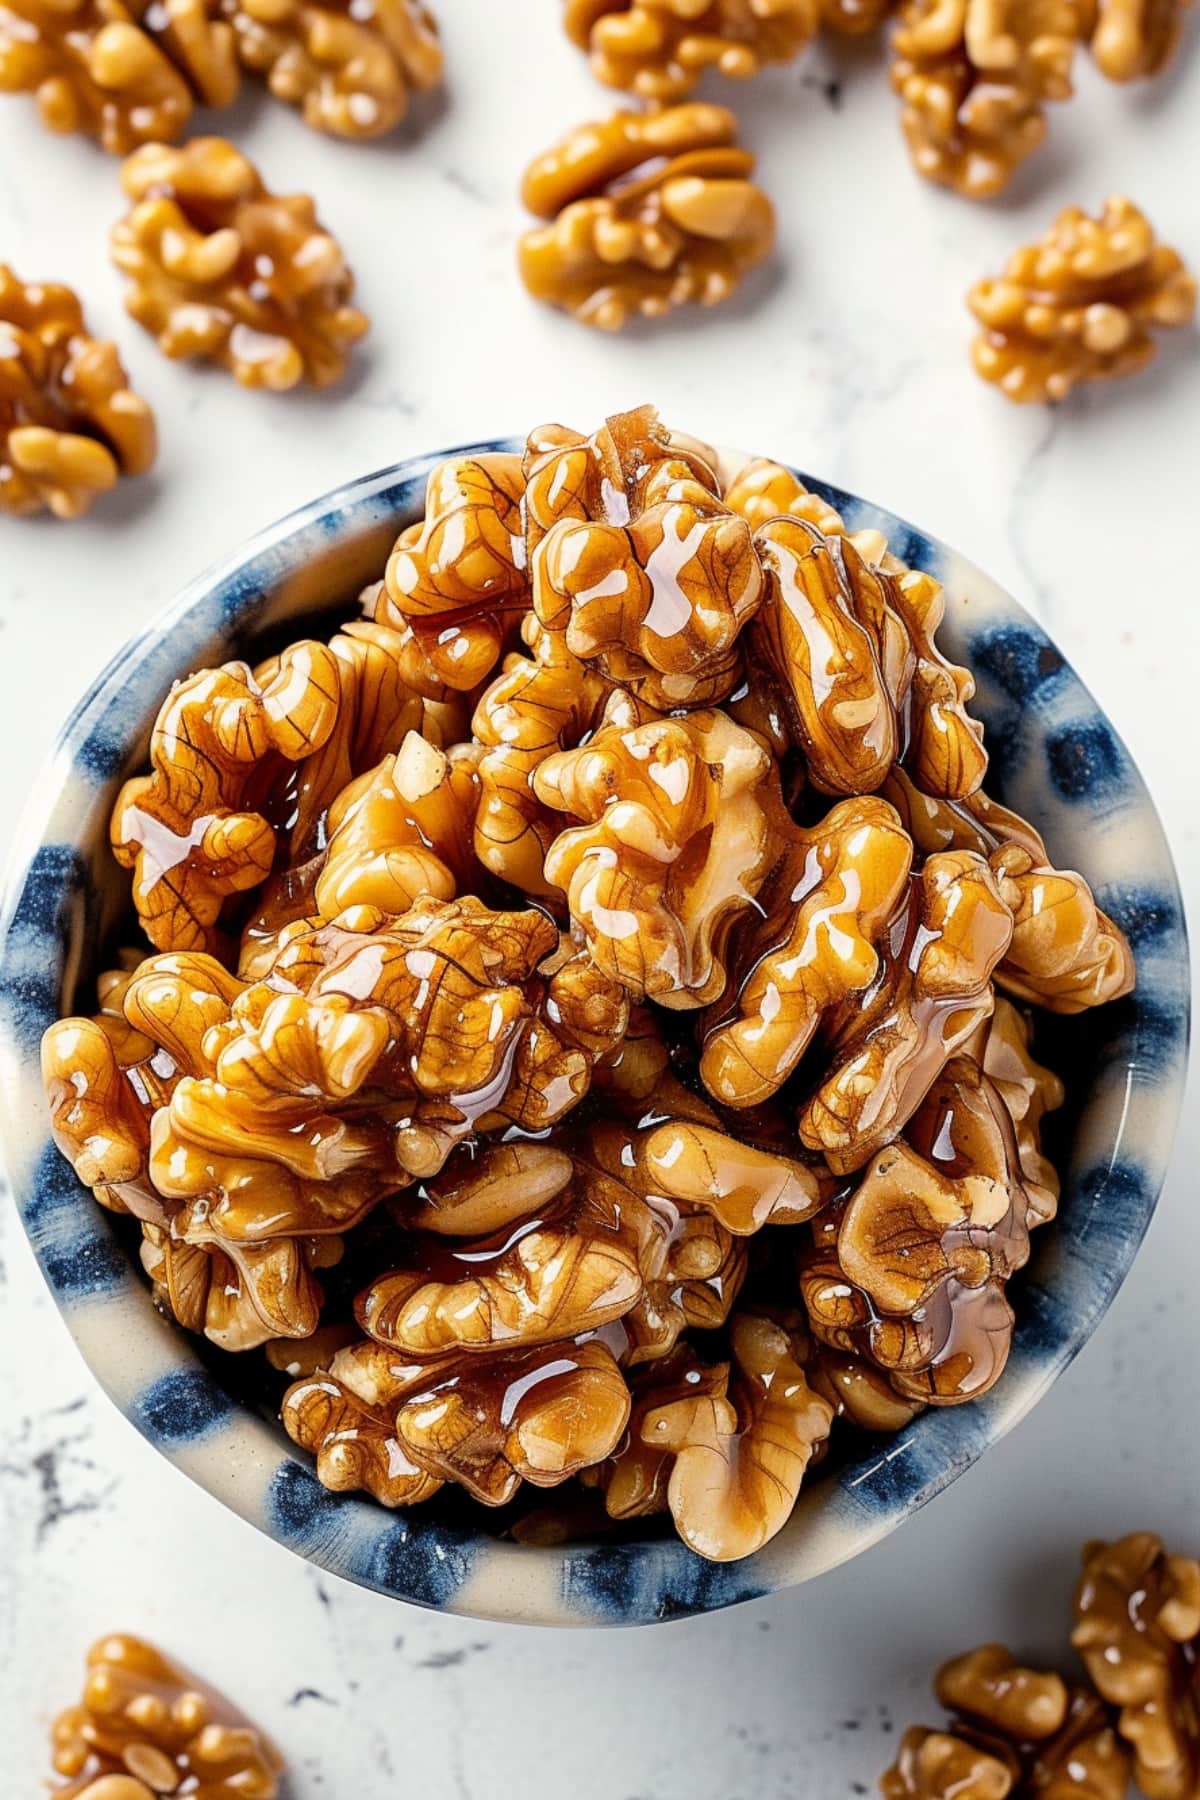 Irresistibly sweet and crunchy homemade candied walnuts